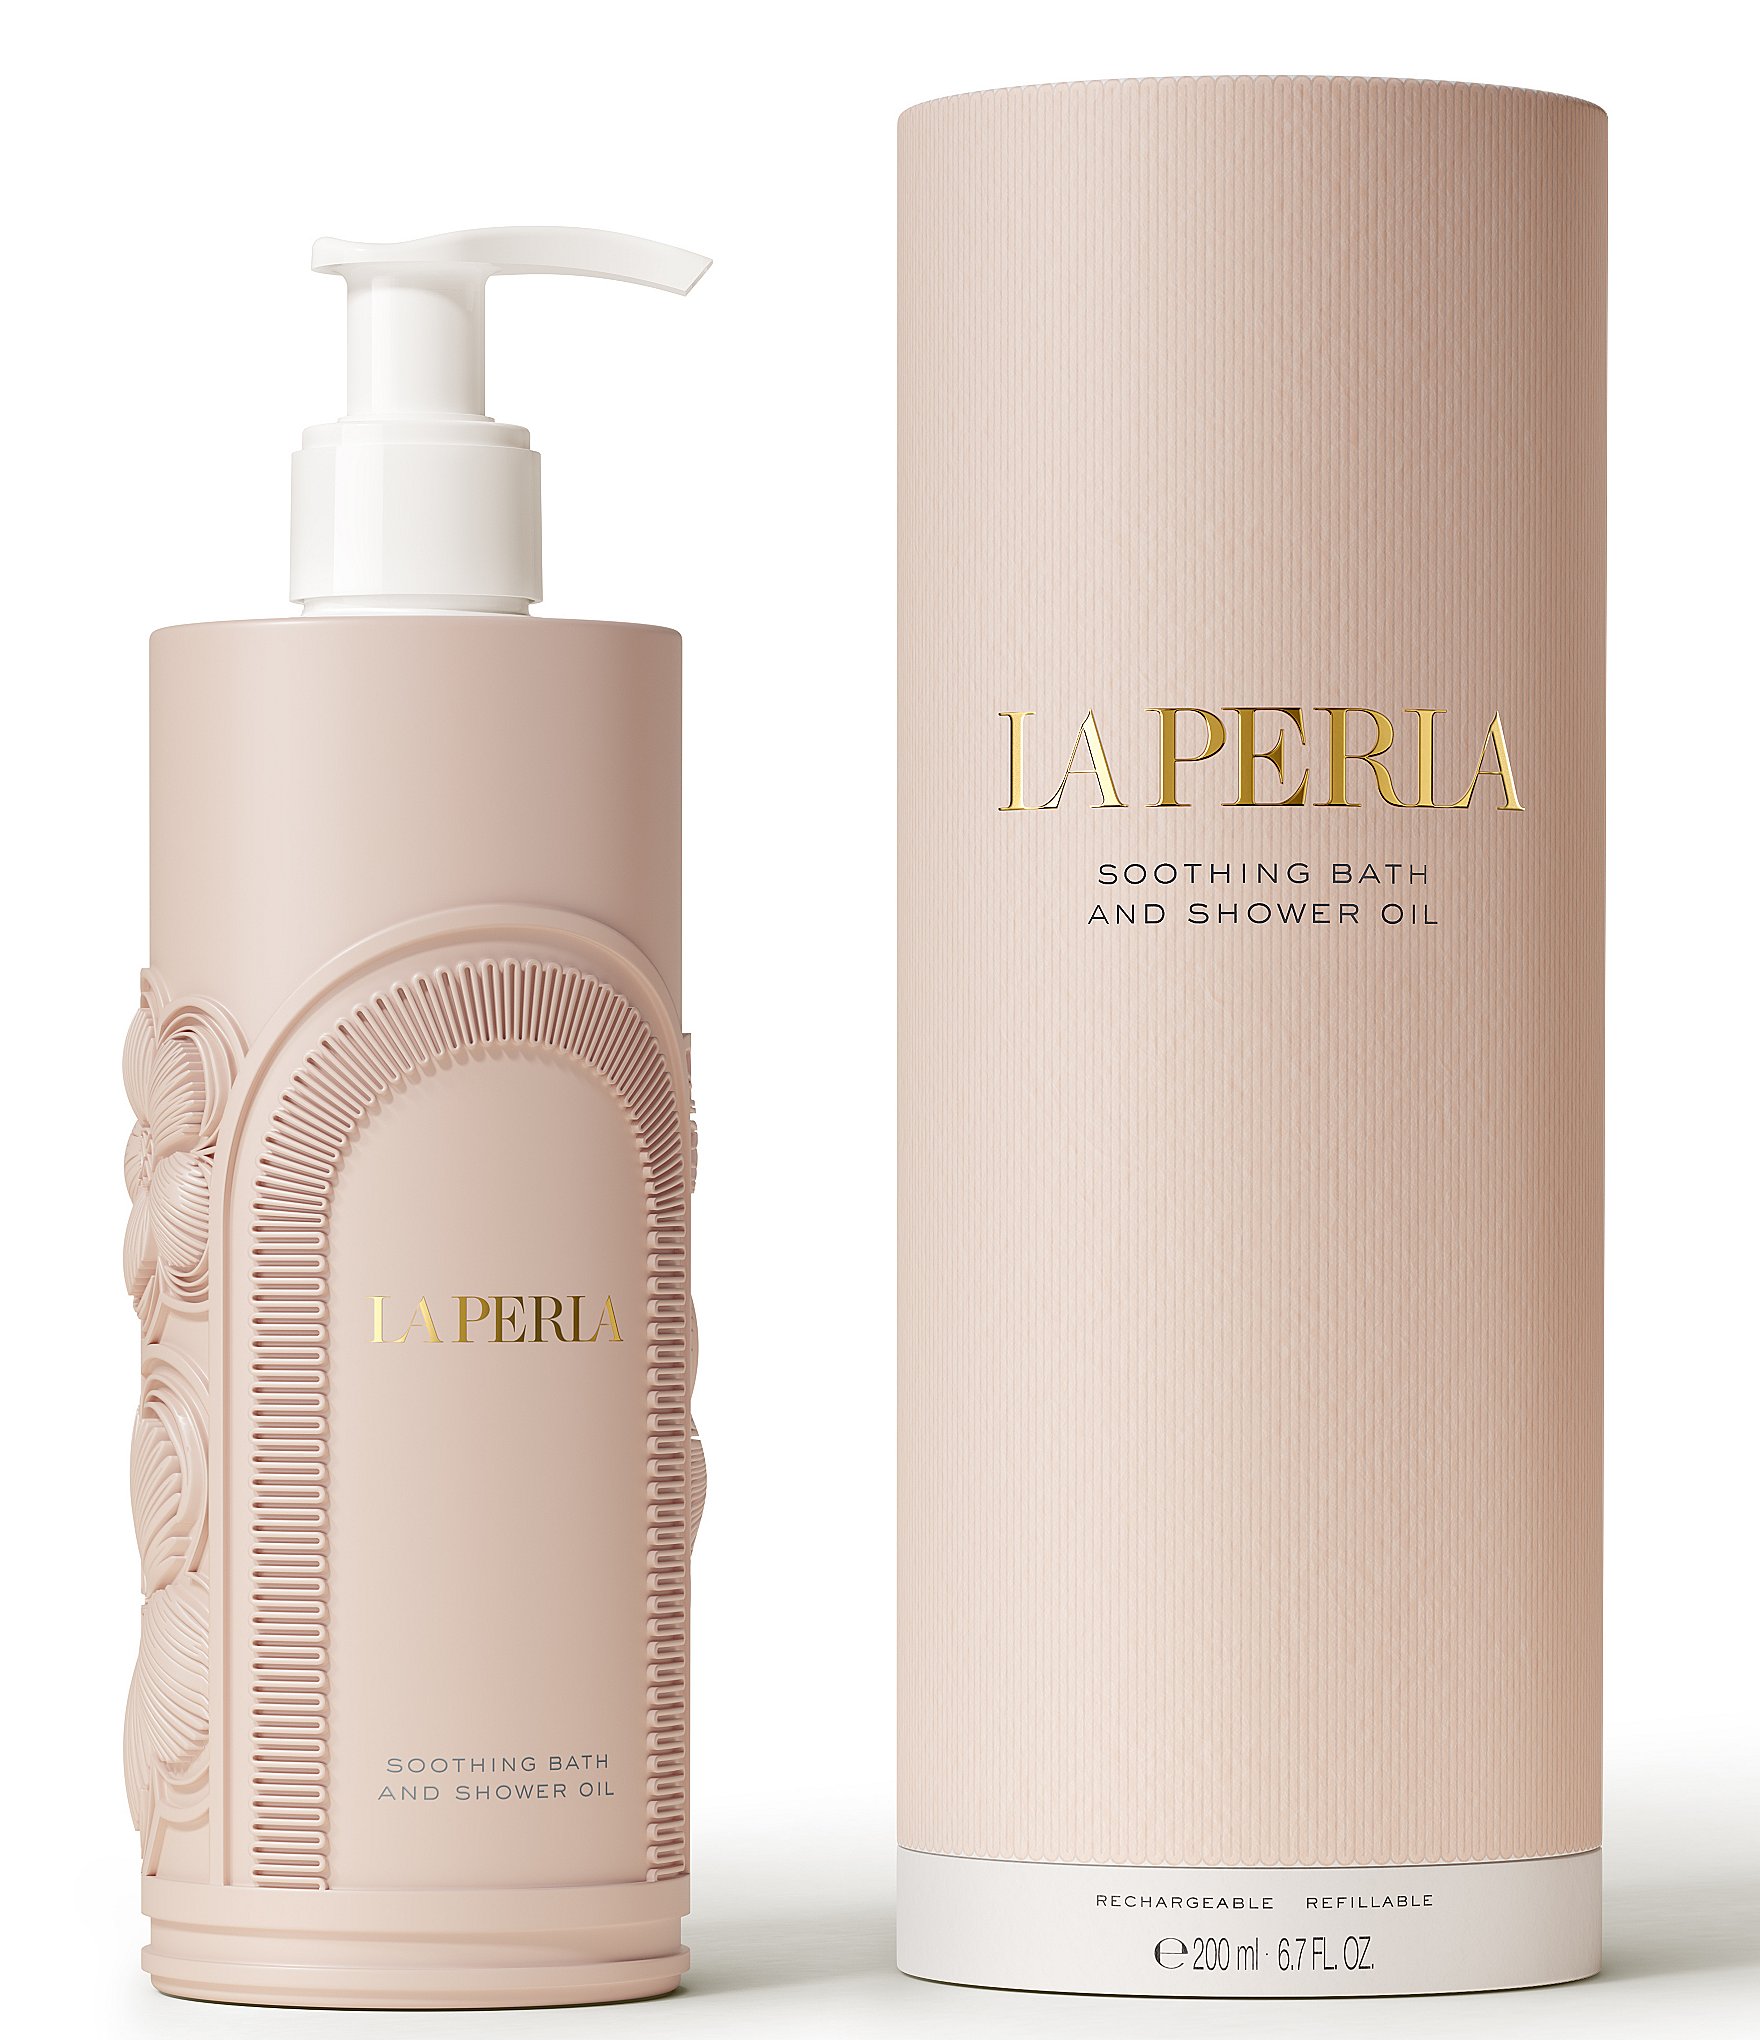 La Perla Refillable Soothing Bath and Shower Oil | Dillard's